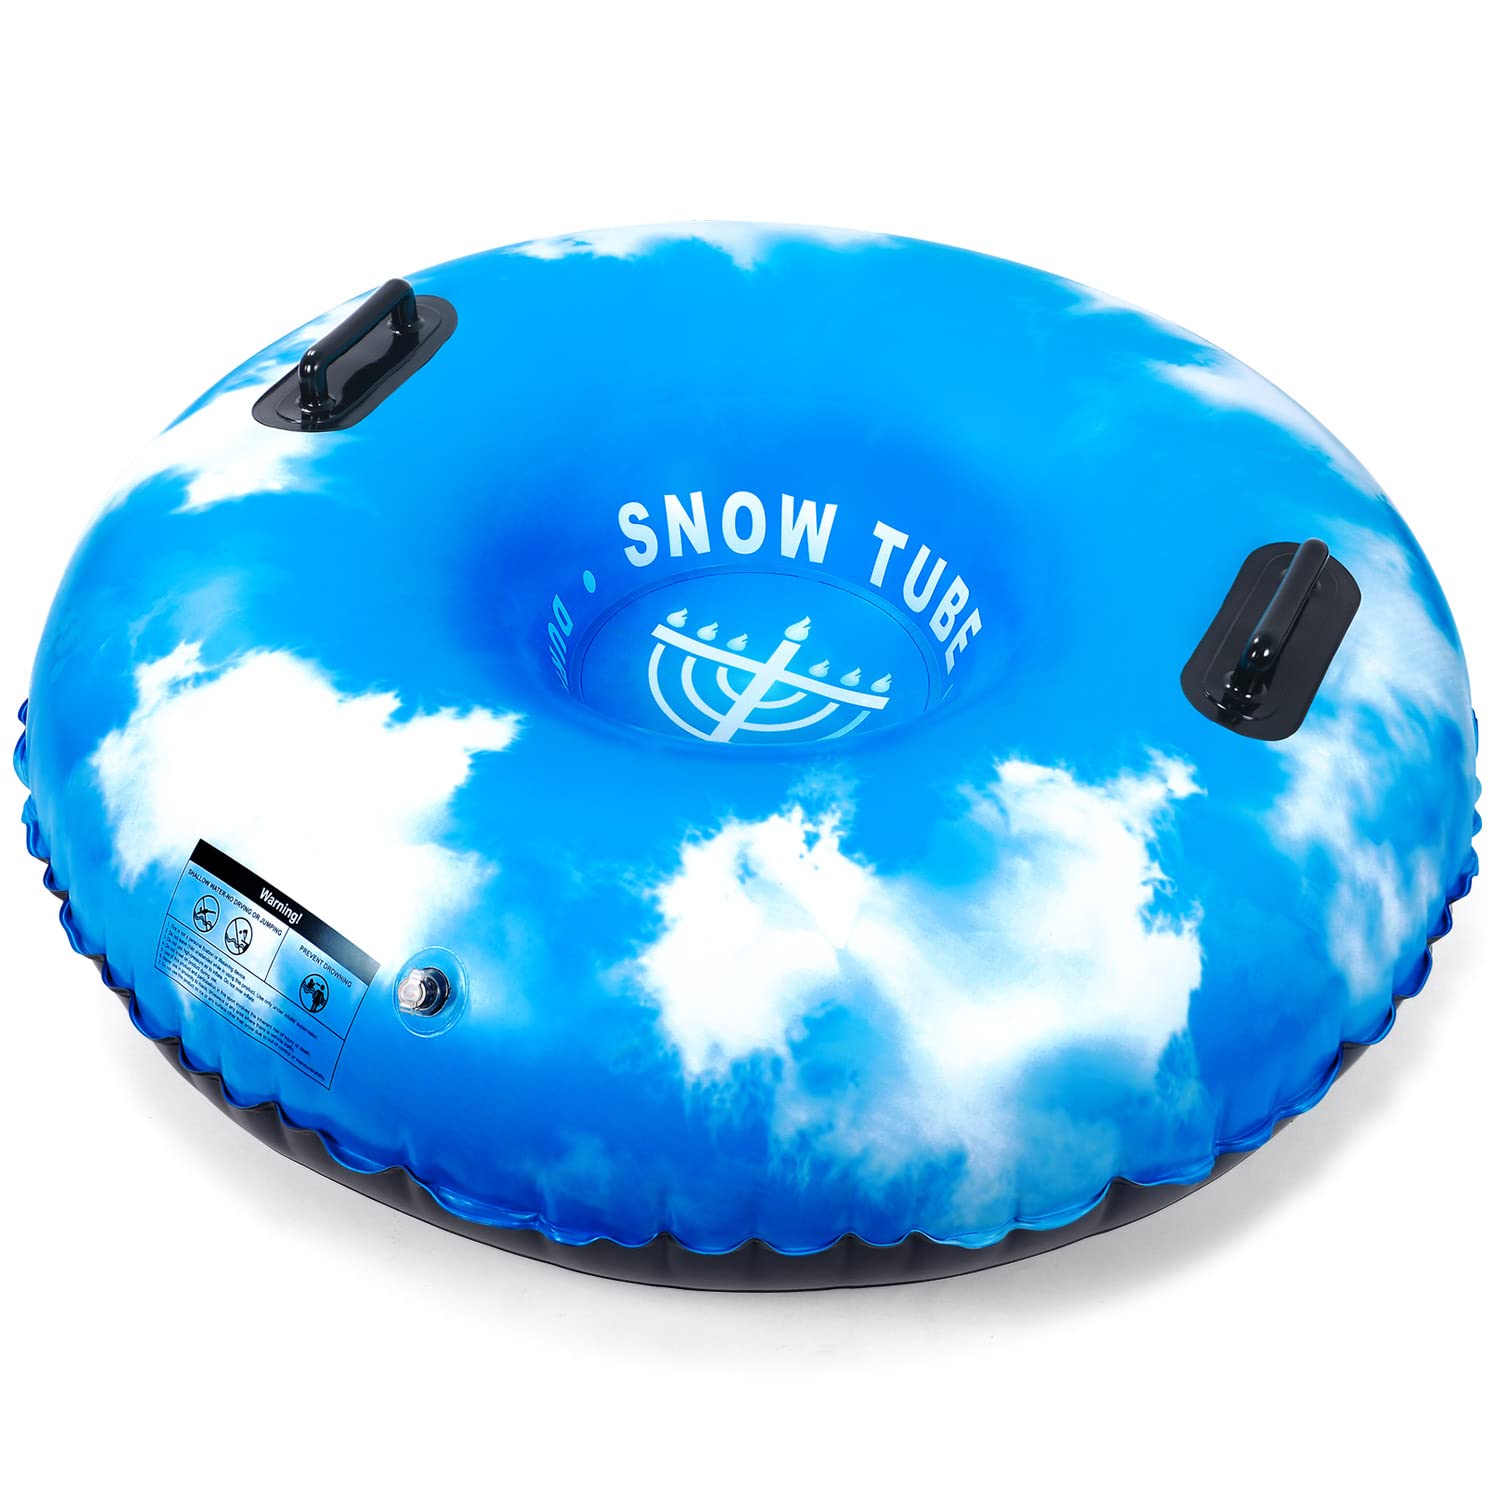 HITOP Snow Tube, Inflatable Snow Sled for Kids and Adults, Heavy Duty Snow  Tube Made by Thickening Material of 0.9mm,Snow Toys Gifts for Kids Outdoor  Cloud sky03